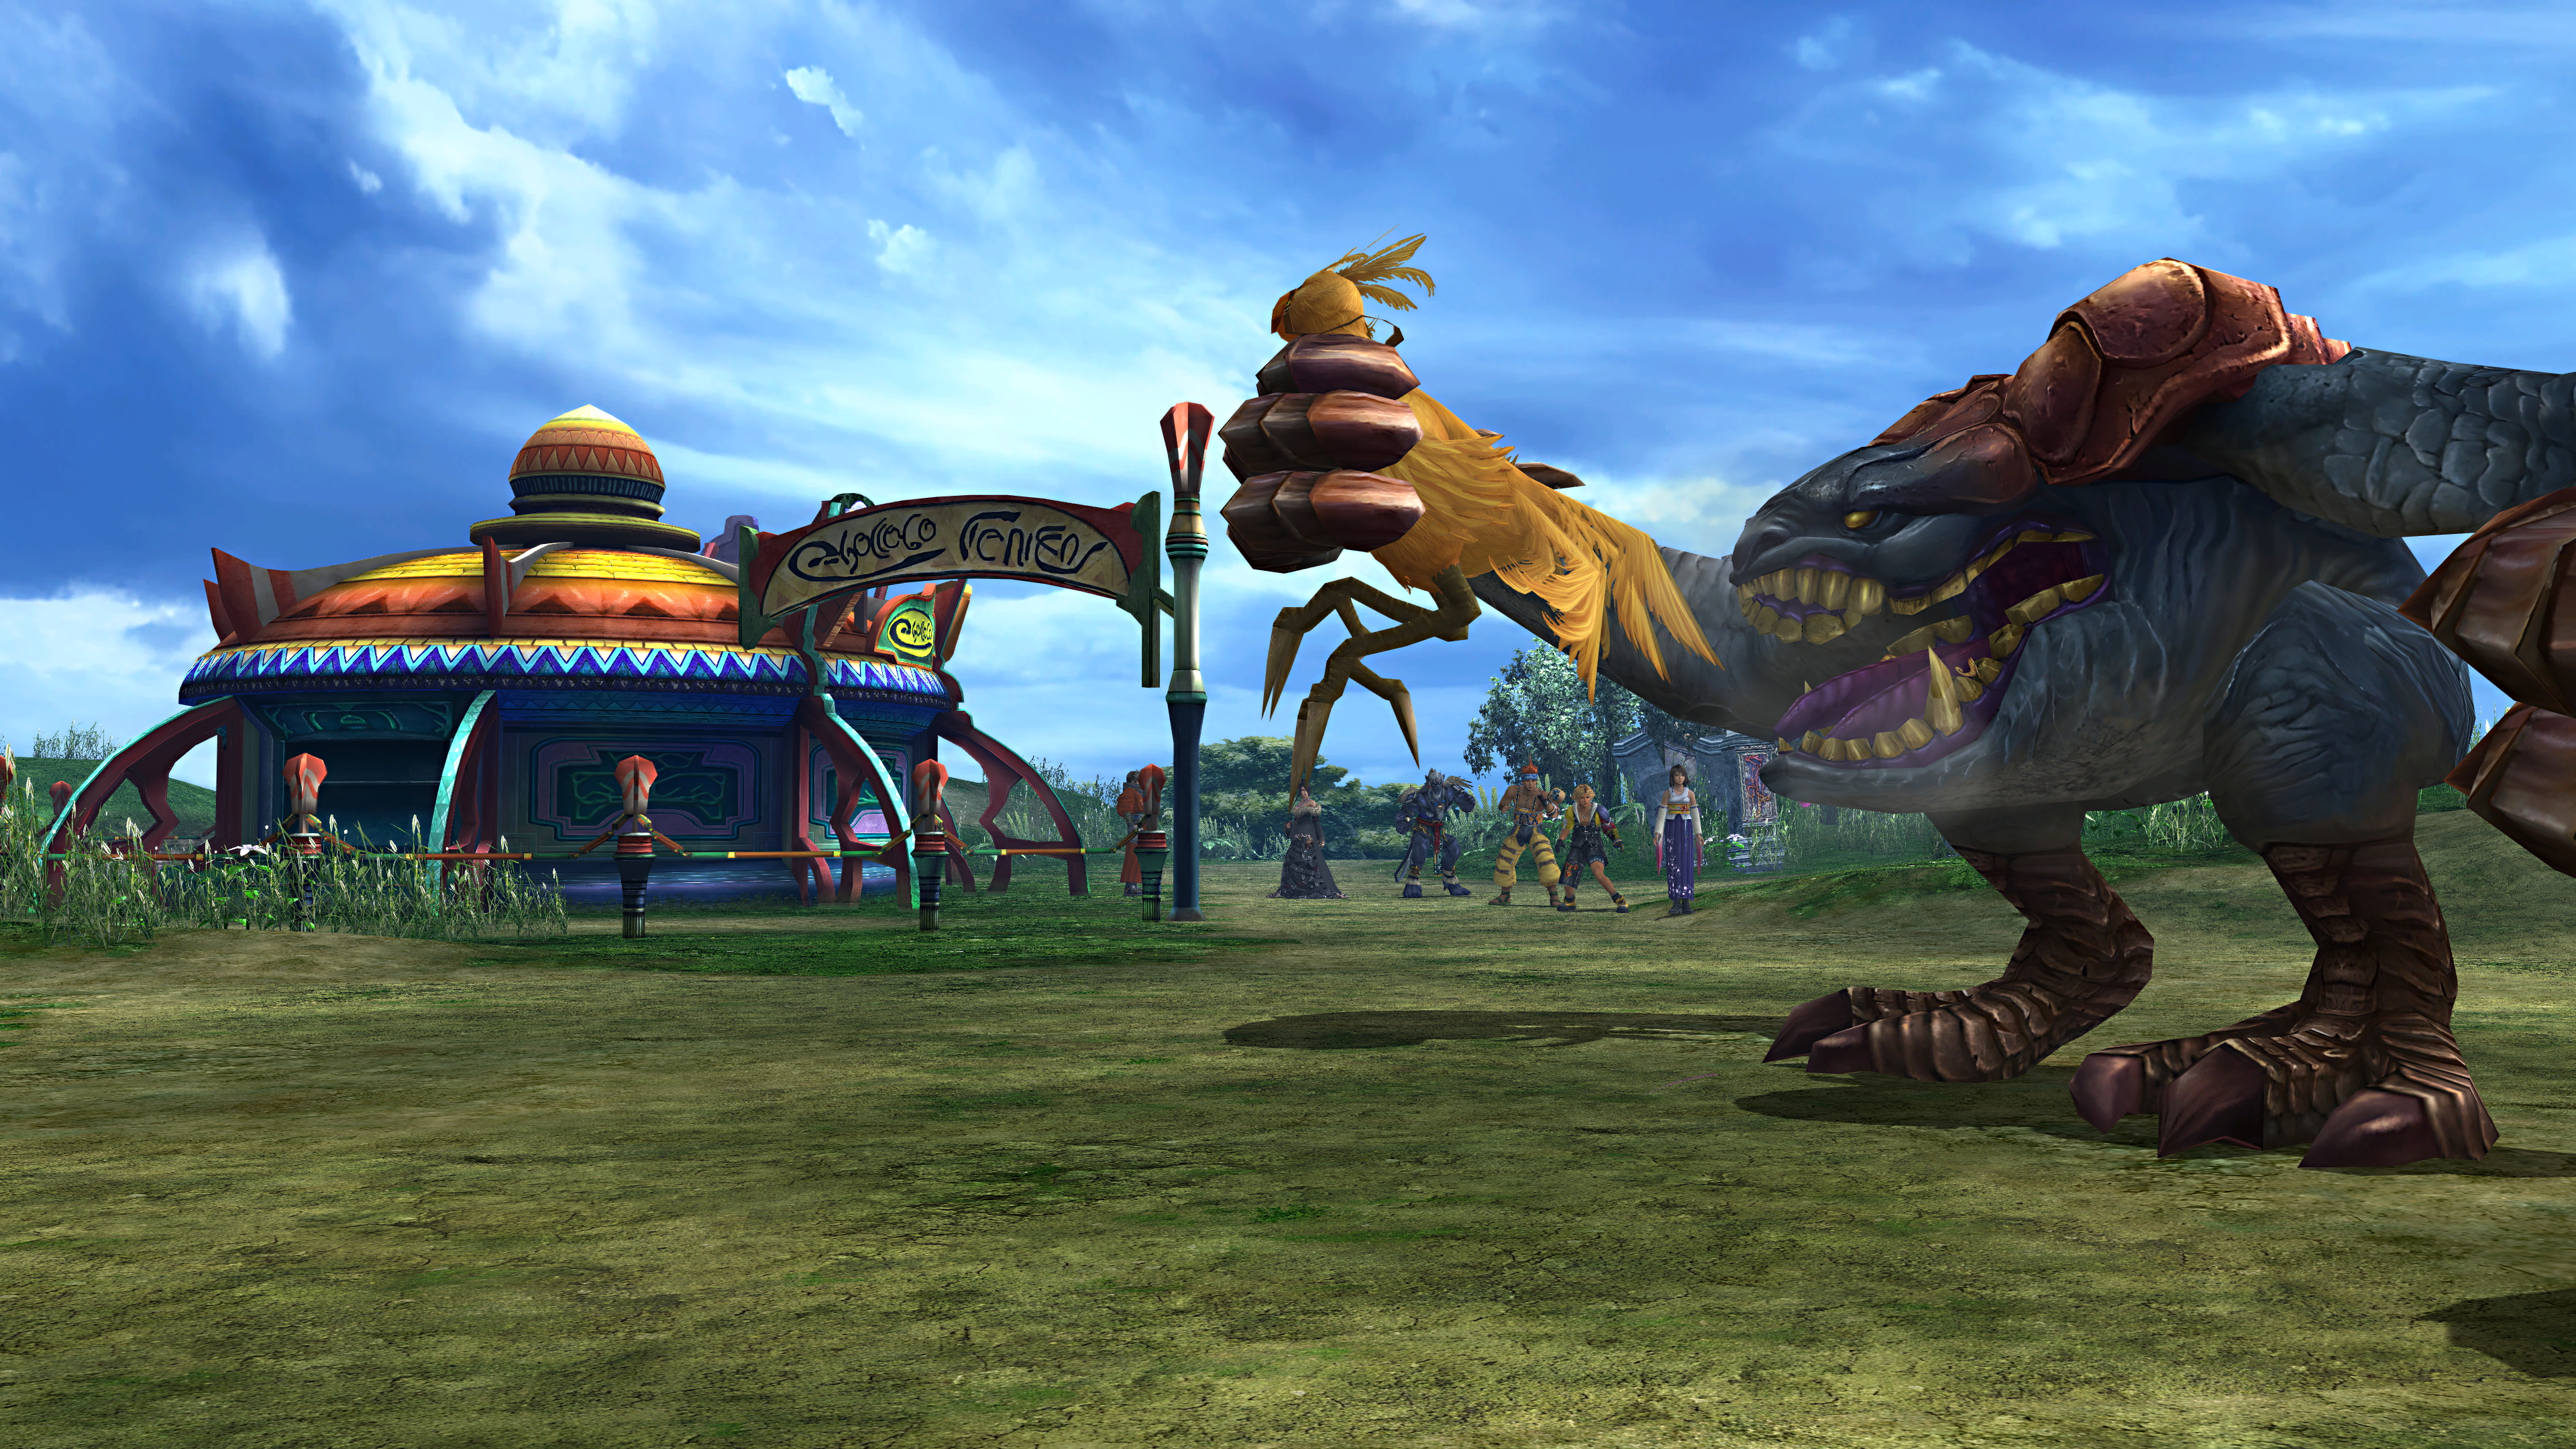 Chocobo_eater_catches_a_chocobo.jpg. 